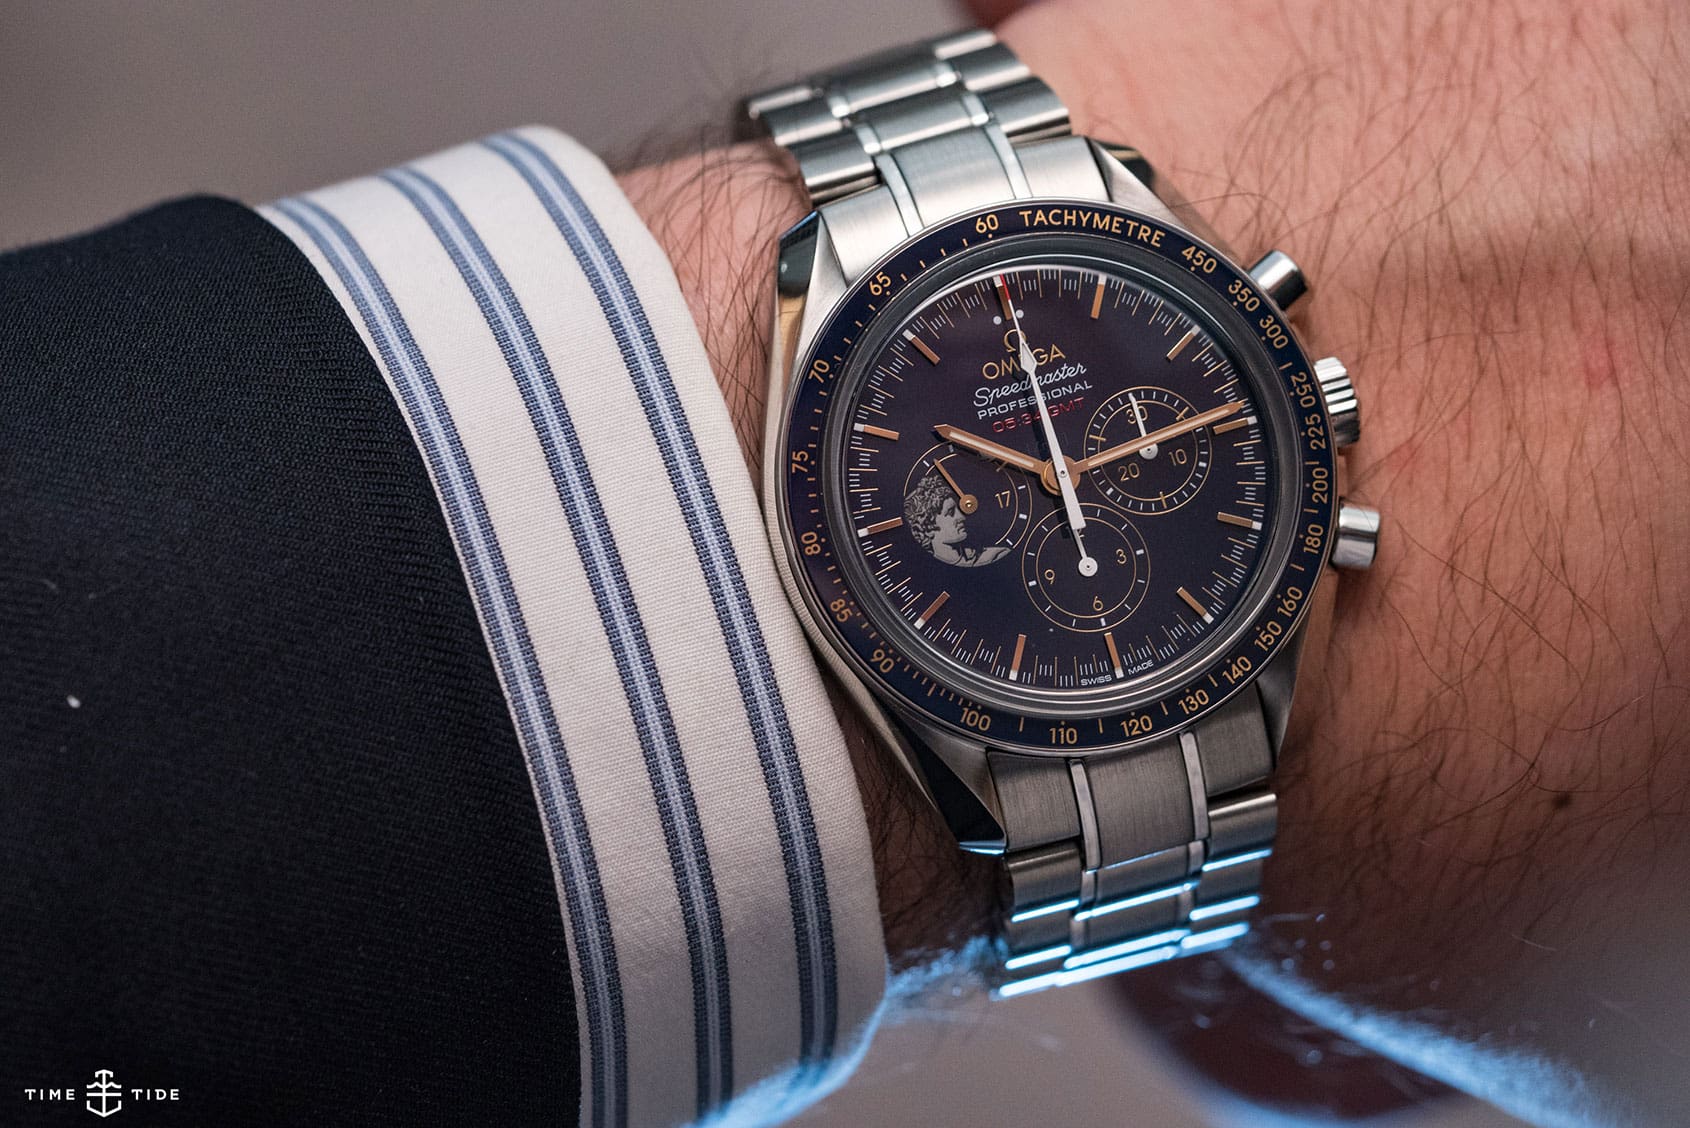 HANDS-ON: The Omega Speedmaster Apollo XVII – a tribute to the last man on the moon